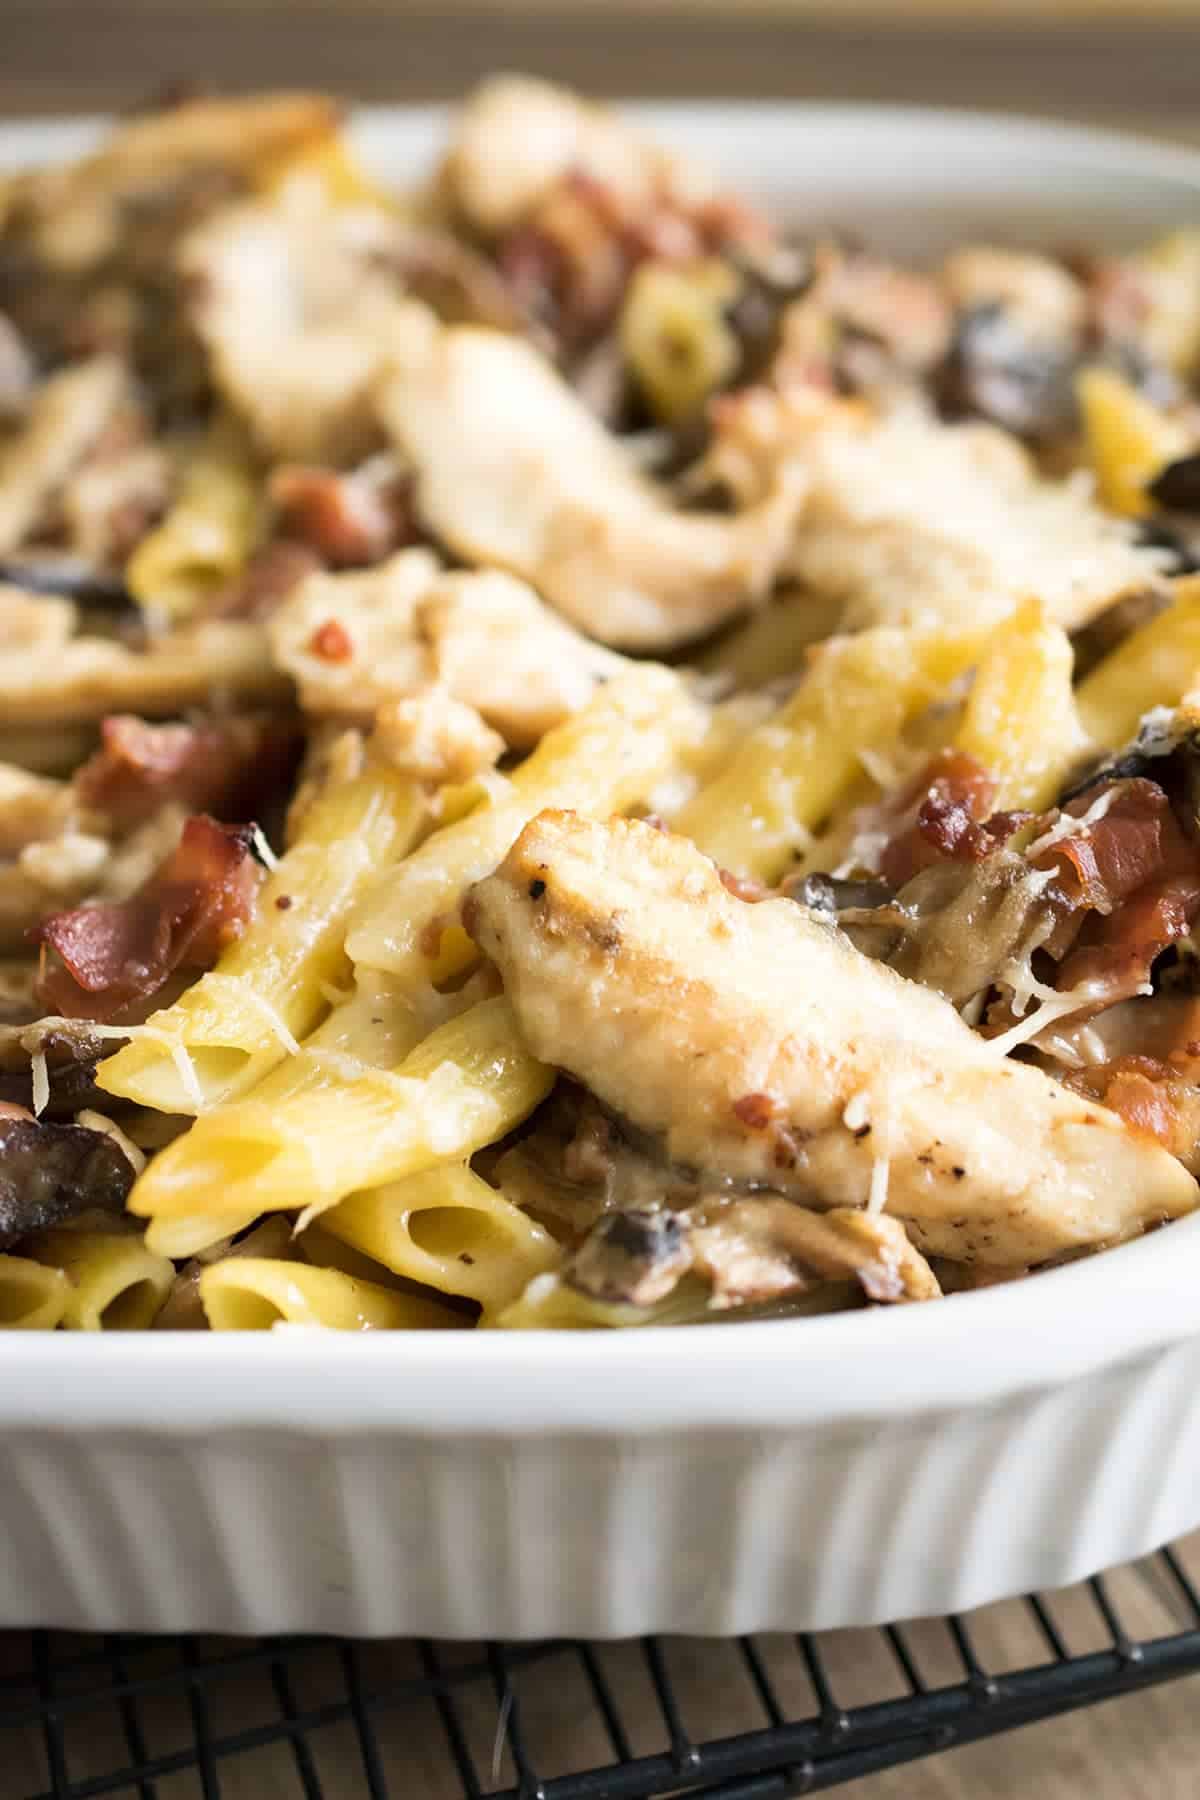 Enlarged view of creamy chicken marsala pasta with penne noodles, grilled sliced chicken, mushrooms, prosciutto, and grated parmesan.